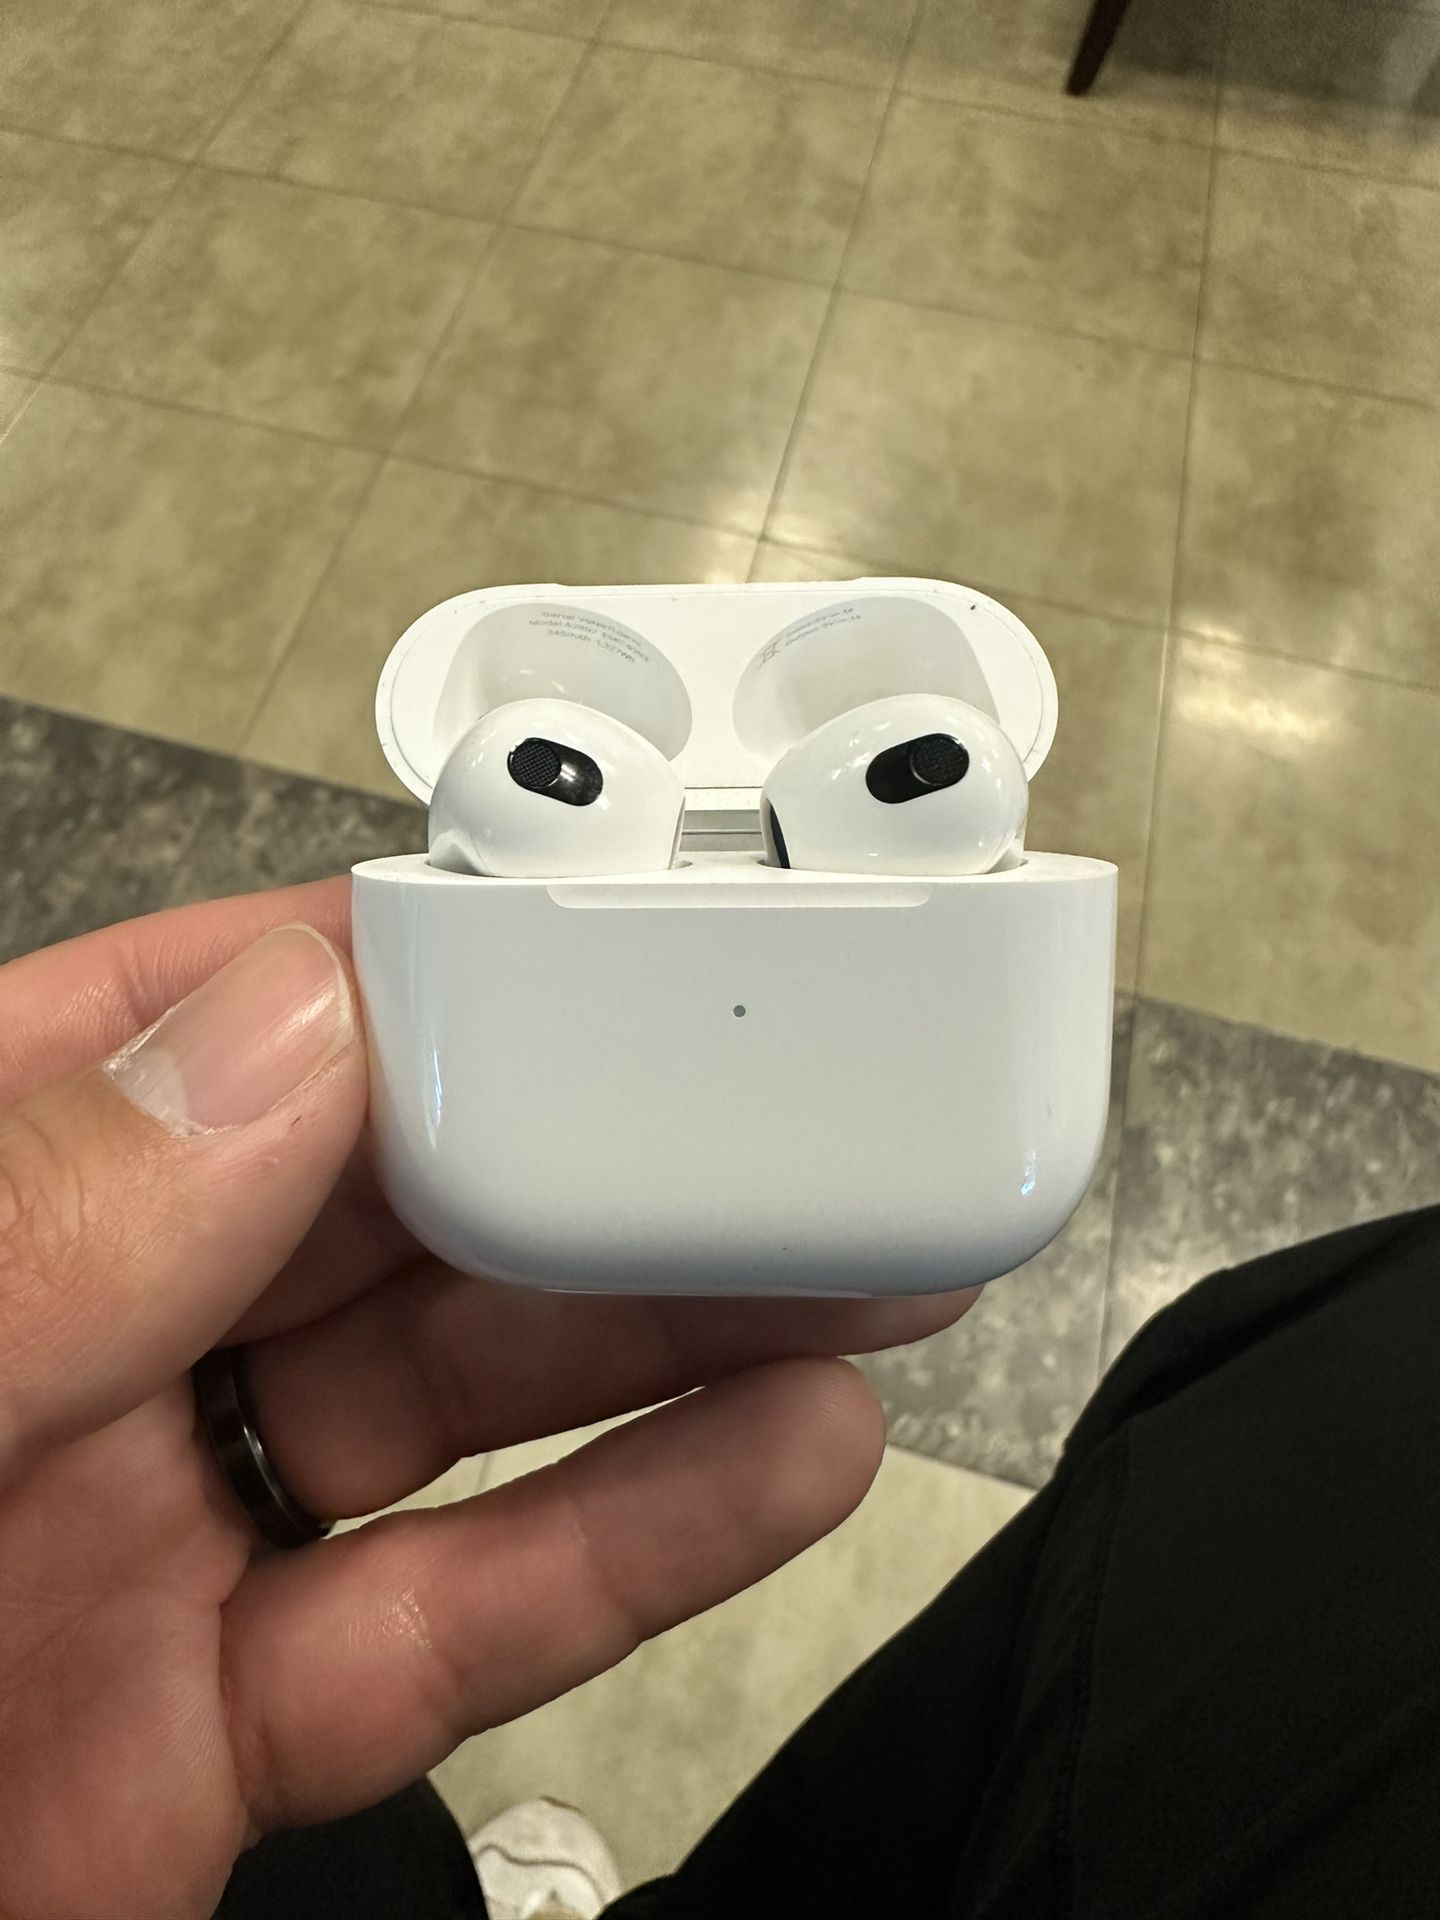 3rd Generation Airpods. 